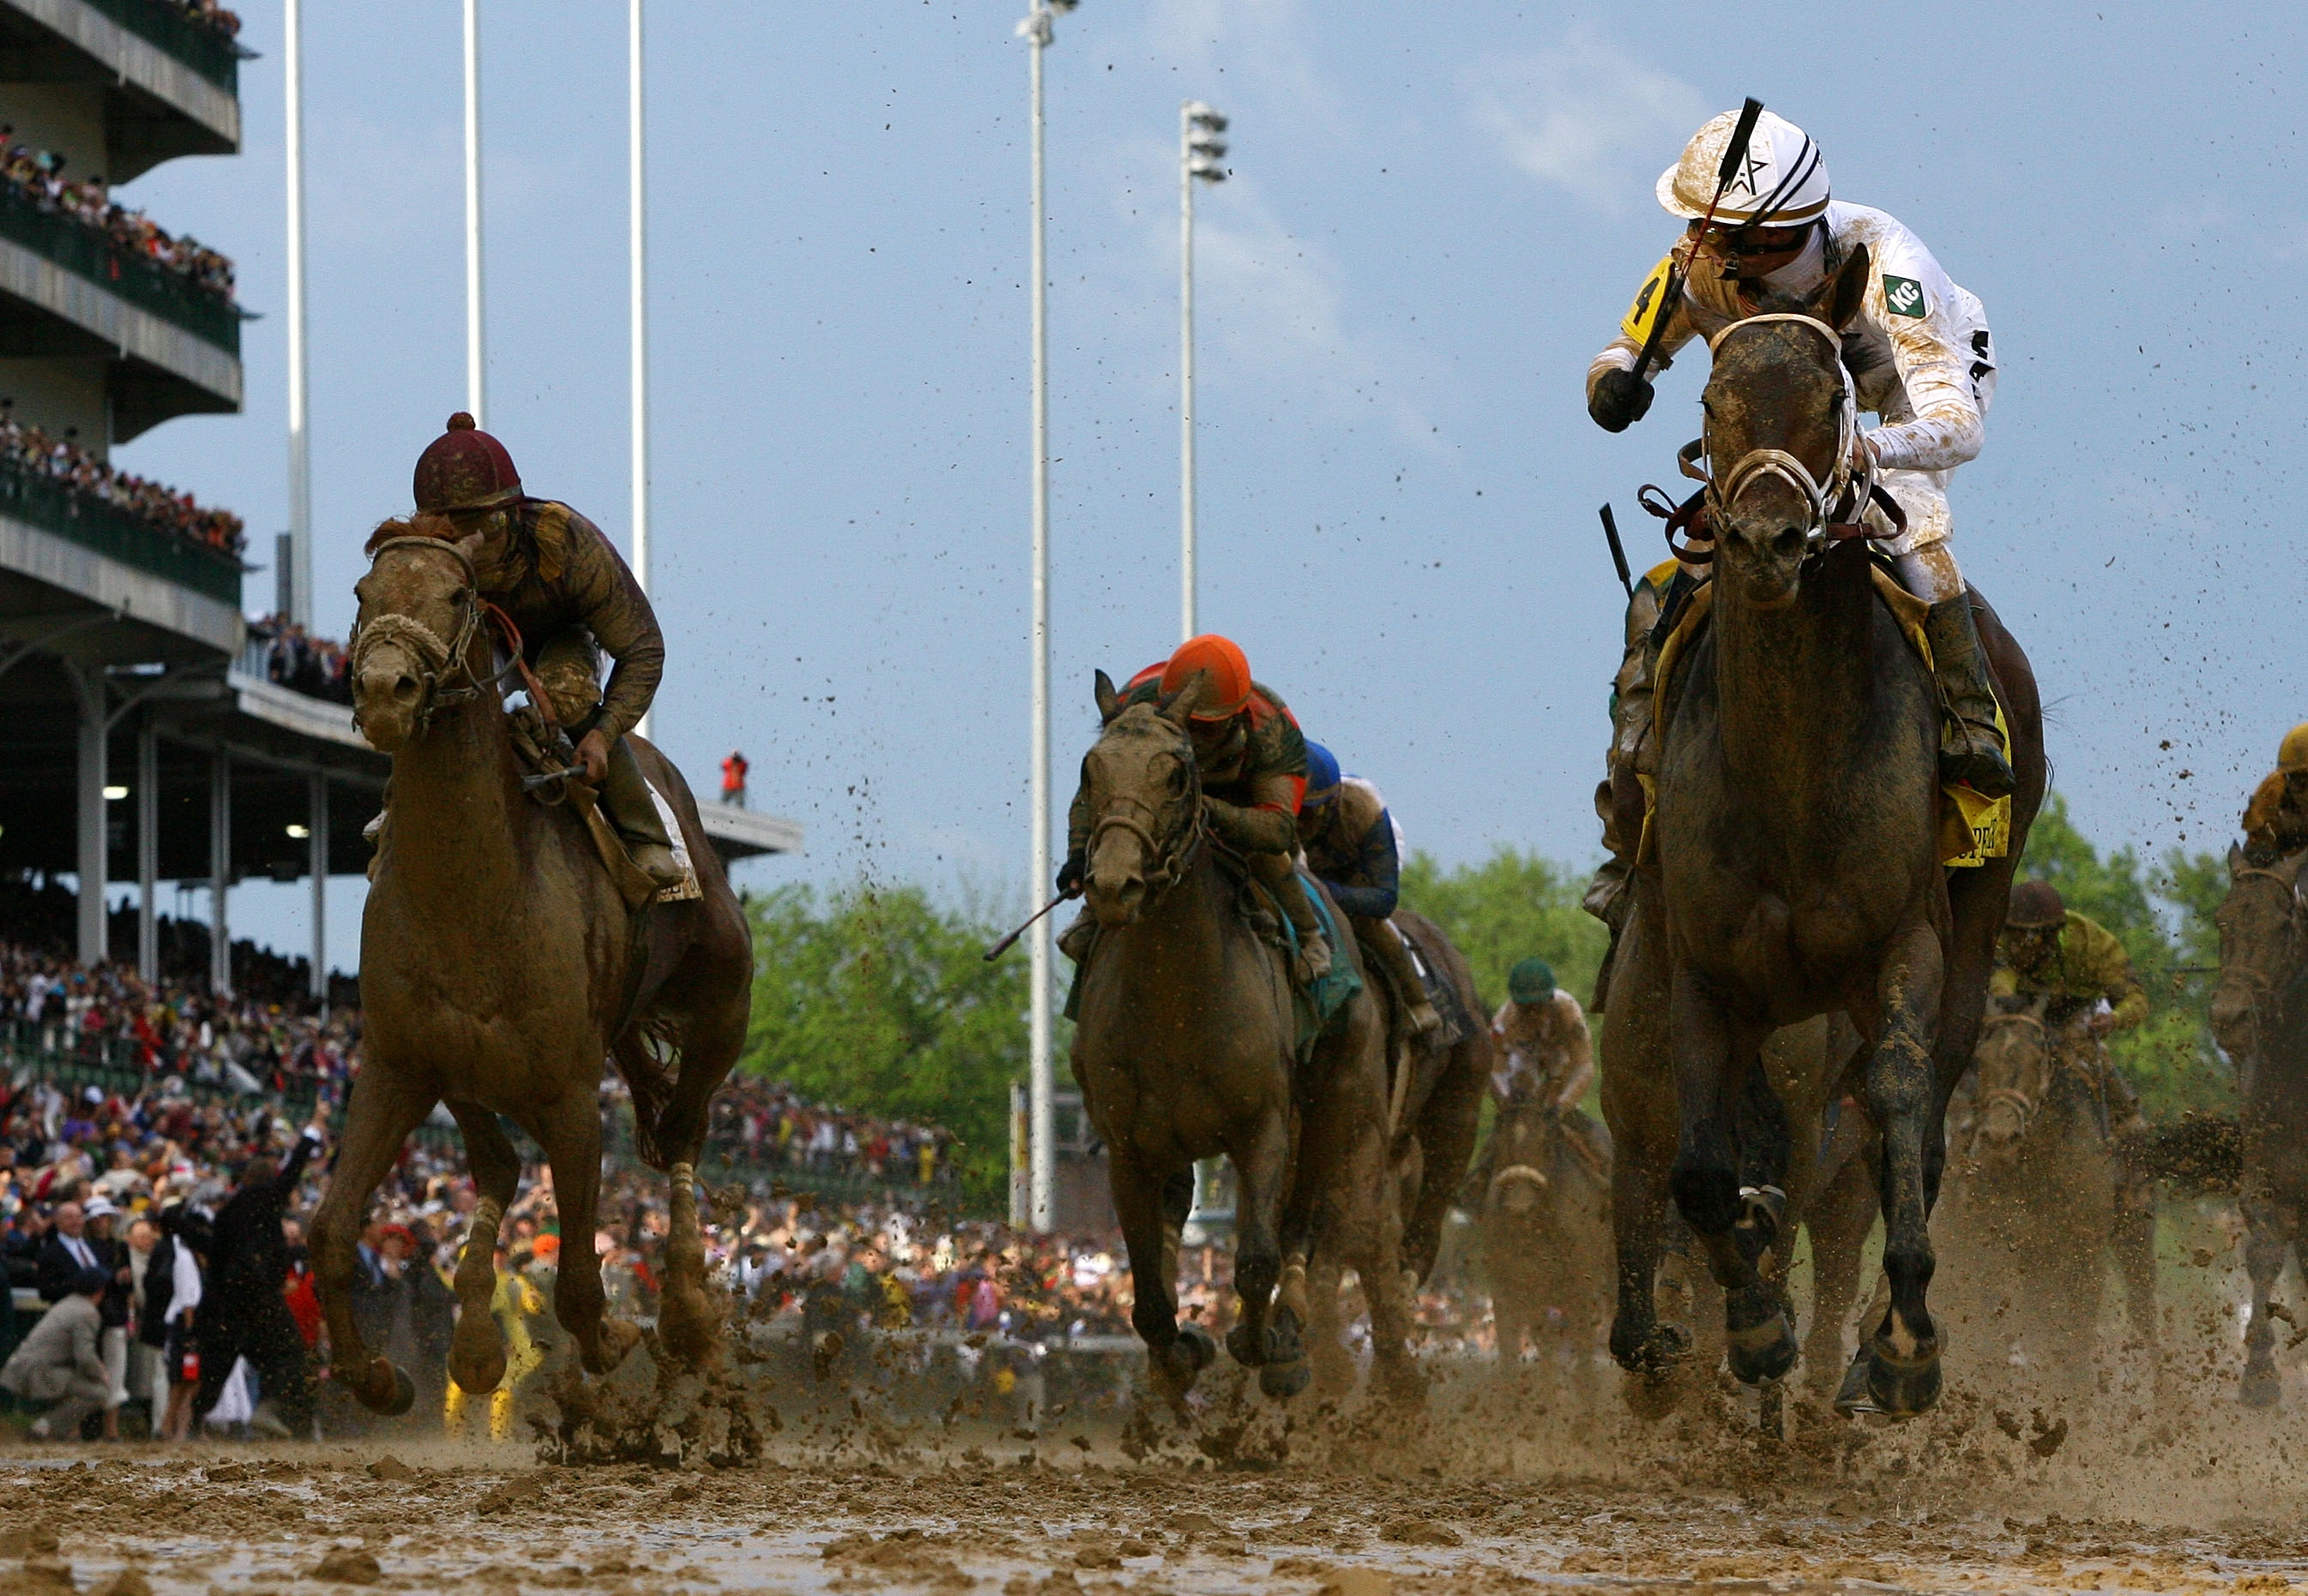 LOUISVILLE, KY - MAY 01:  Calvin Borel atop Super Saver crosses the finish line to win the 136th running of the Kentucky Derby on May 1, 2010 in Louisville, Kentucky.  (Photo by Jamie Squire/Getty Images)